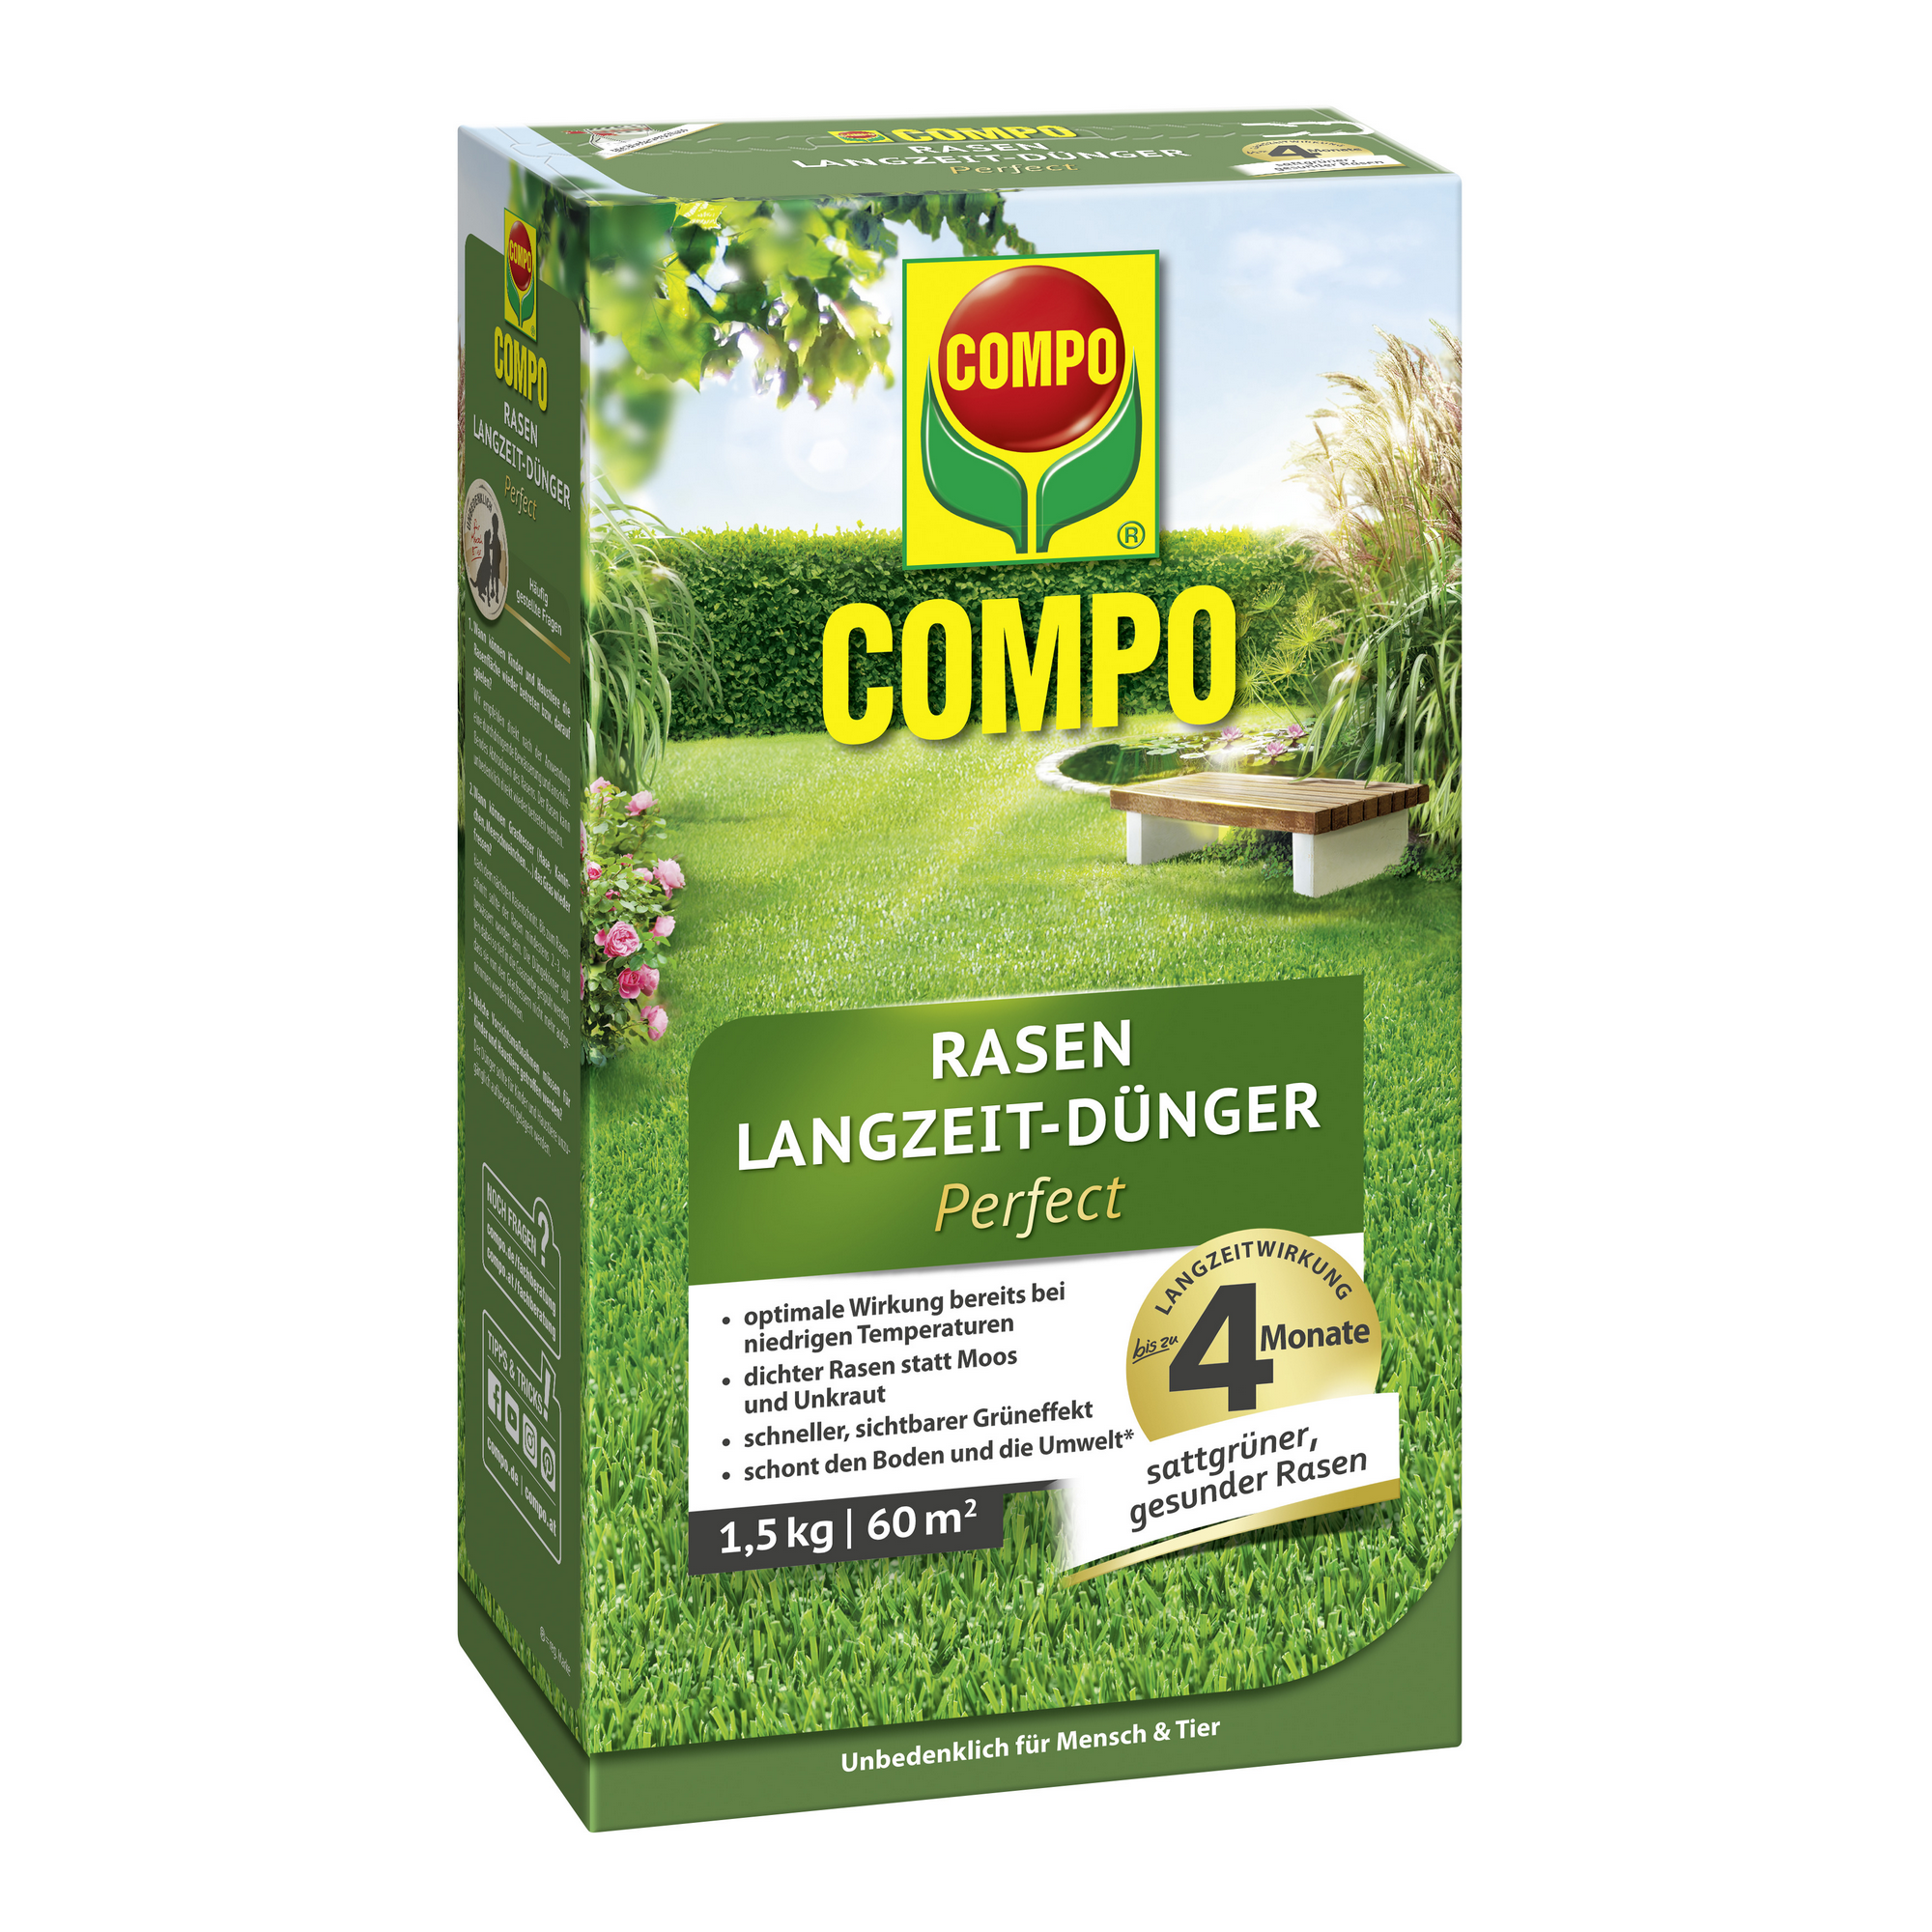 Rasen-Langzeitdünger 'Perfect' 1,5 kg + product picture